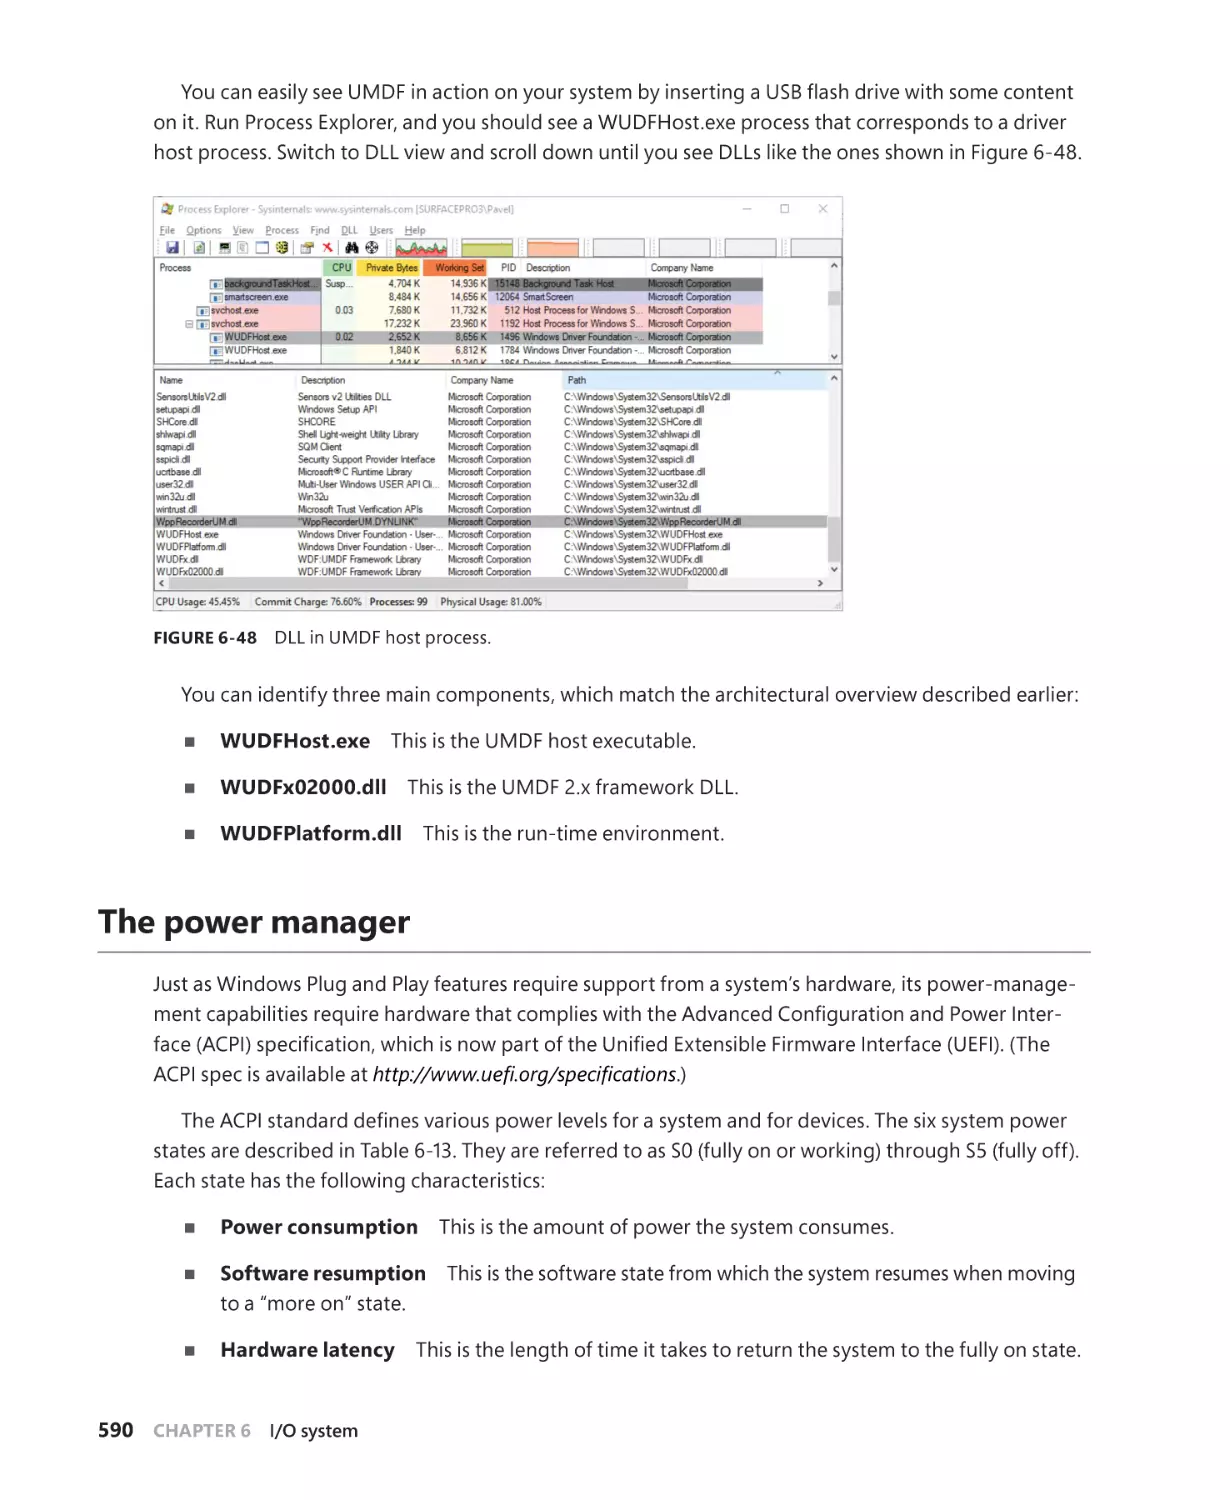 The power manager